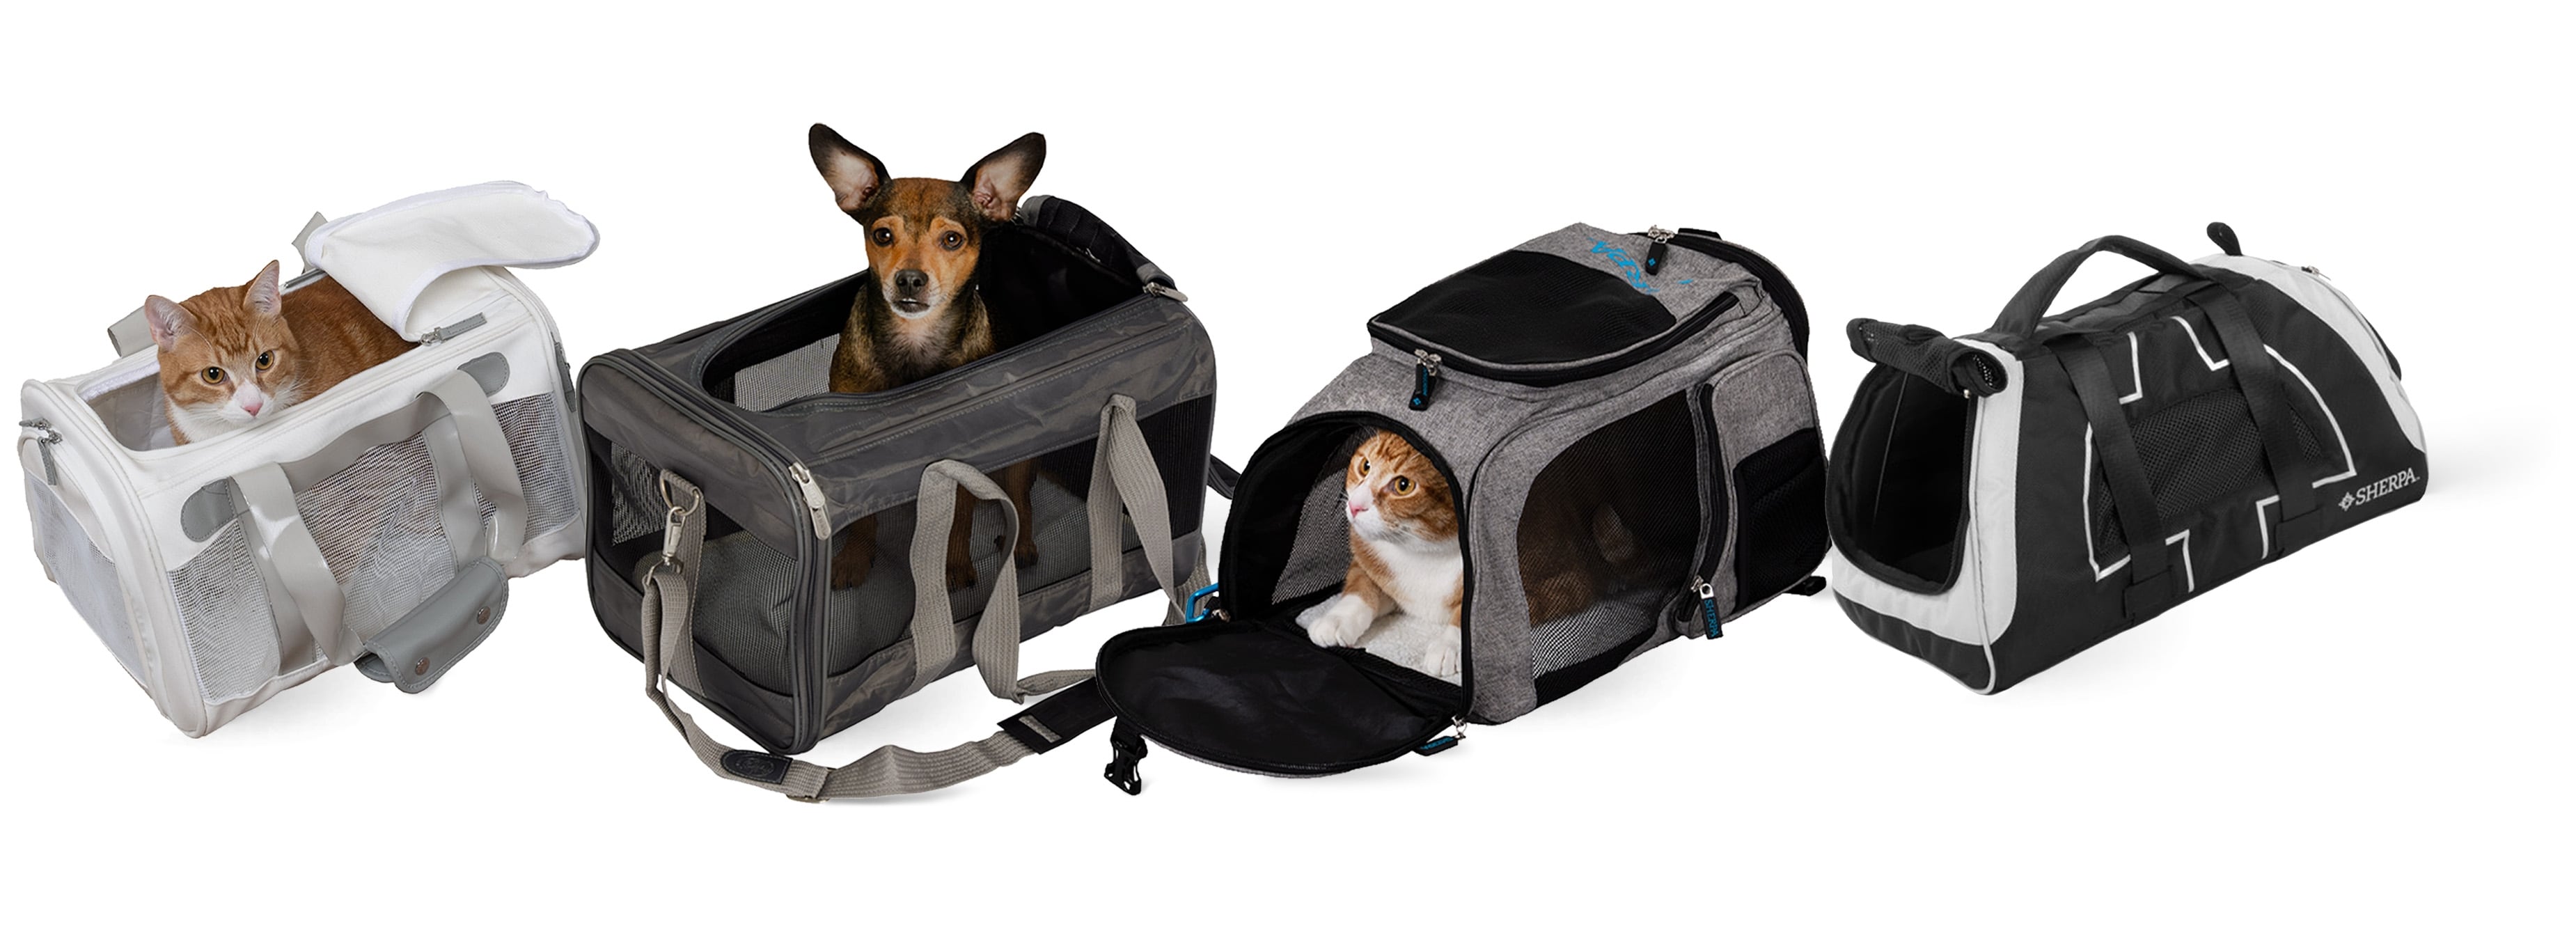 Sherpa Original Deluxe Travel Pet Carrier, Airline Approved, Charcoal,  Large, Large - Fry's Food Stores